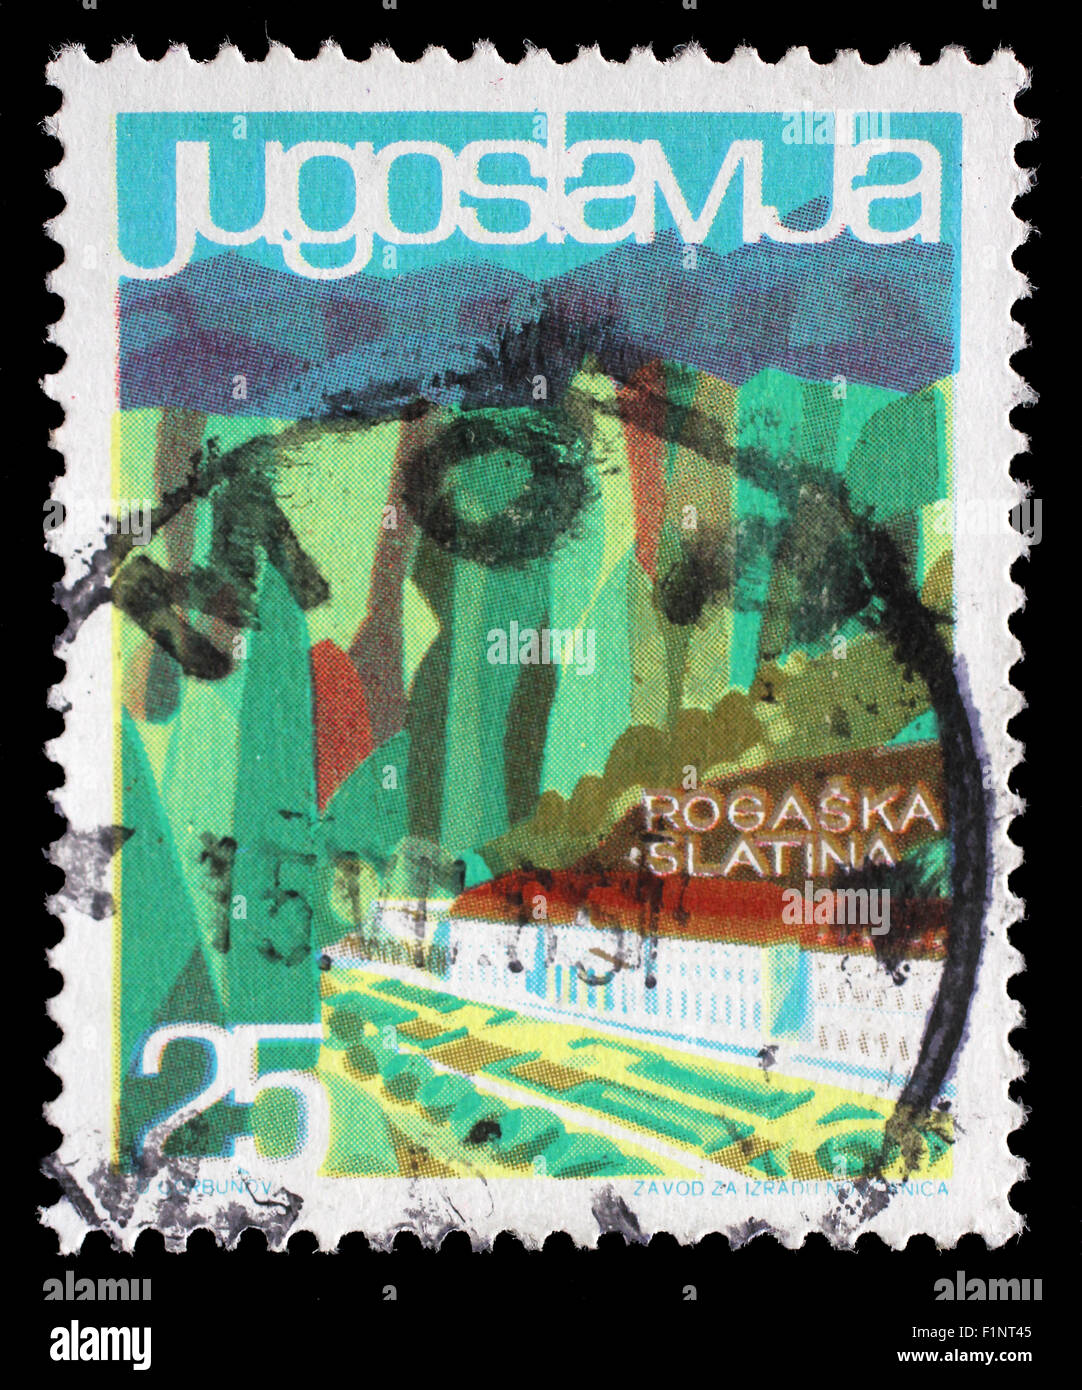 Stamp printed in Yugoslavia from the Local Tourism issue shows Rogaska Slatina, Slovenia, circa 1963. Stock Photo